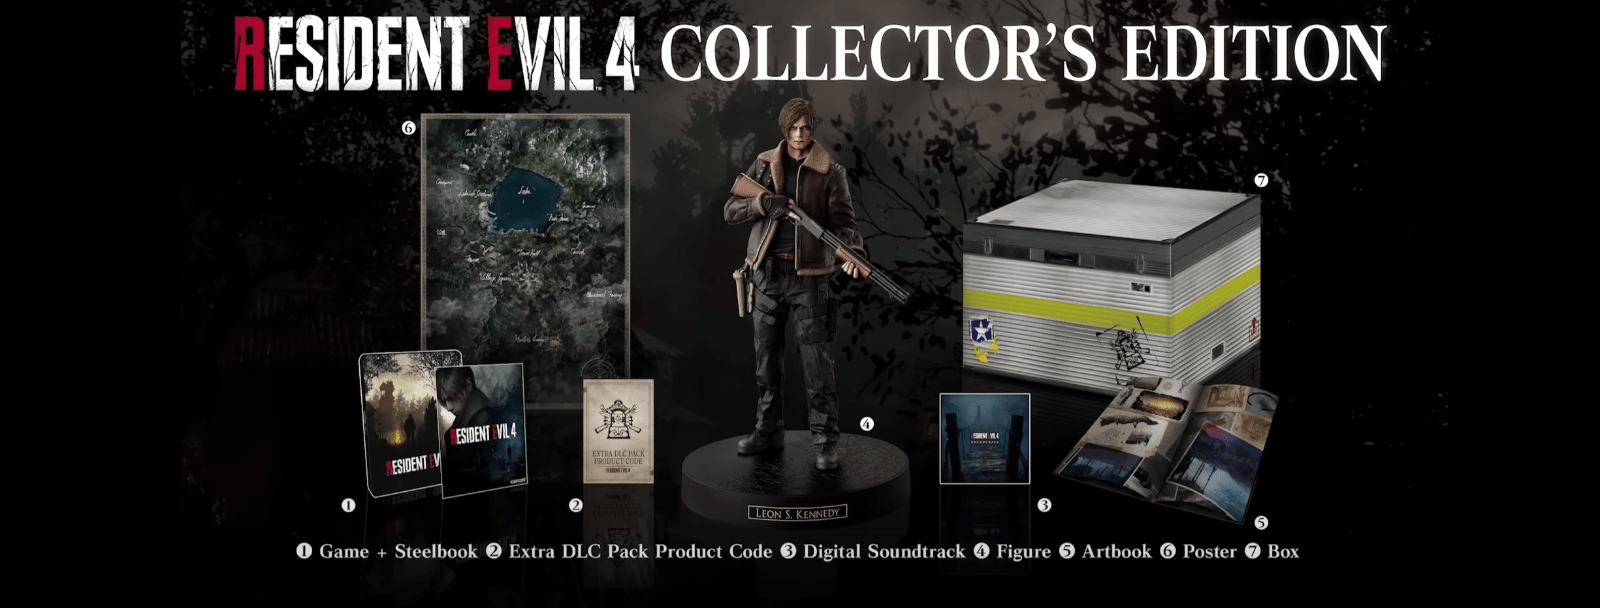 RE4 Collectors Edition with Leon figurine